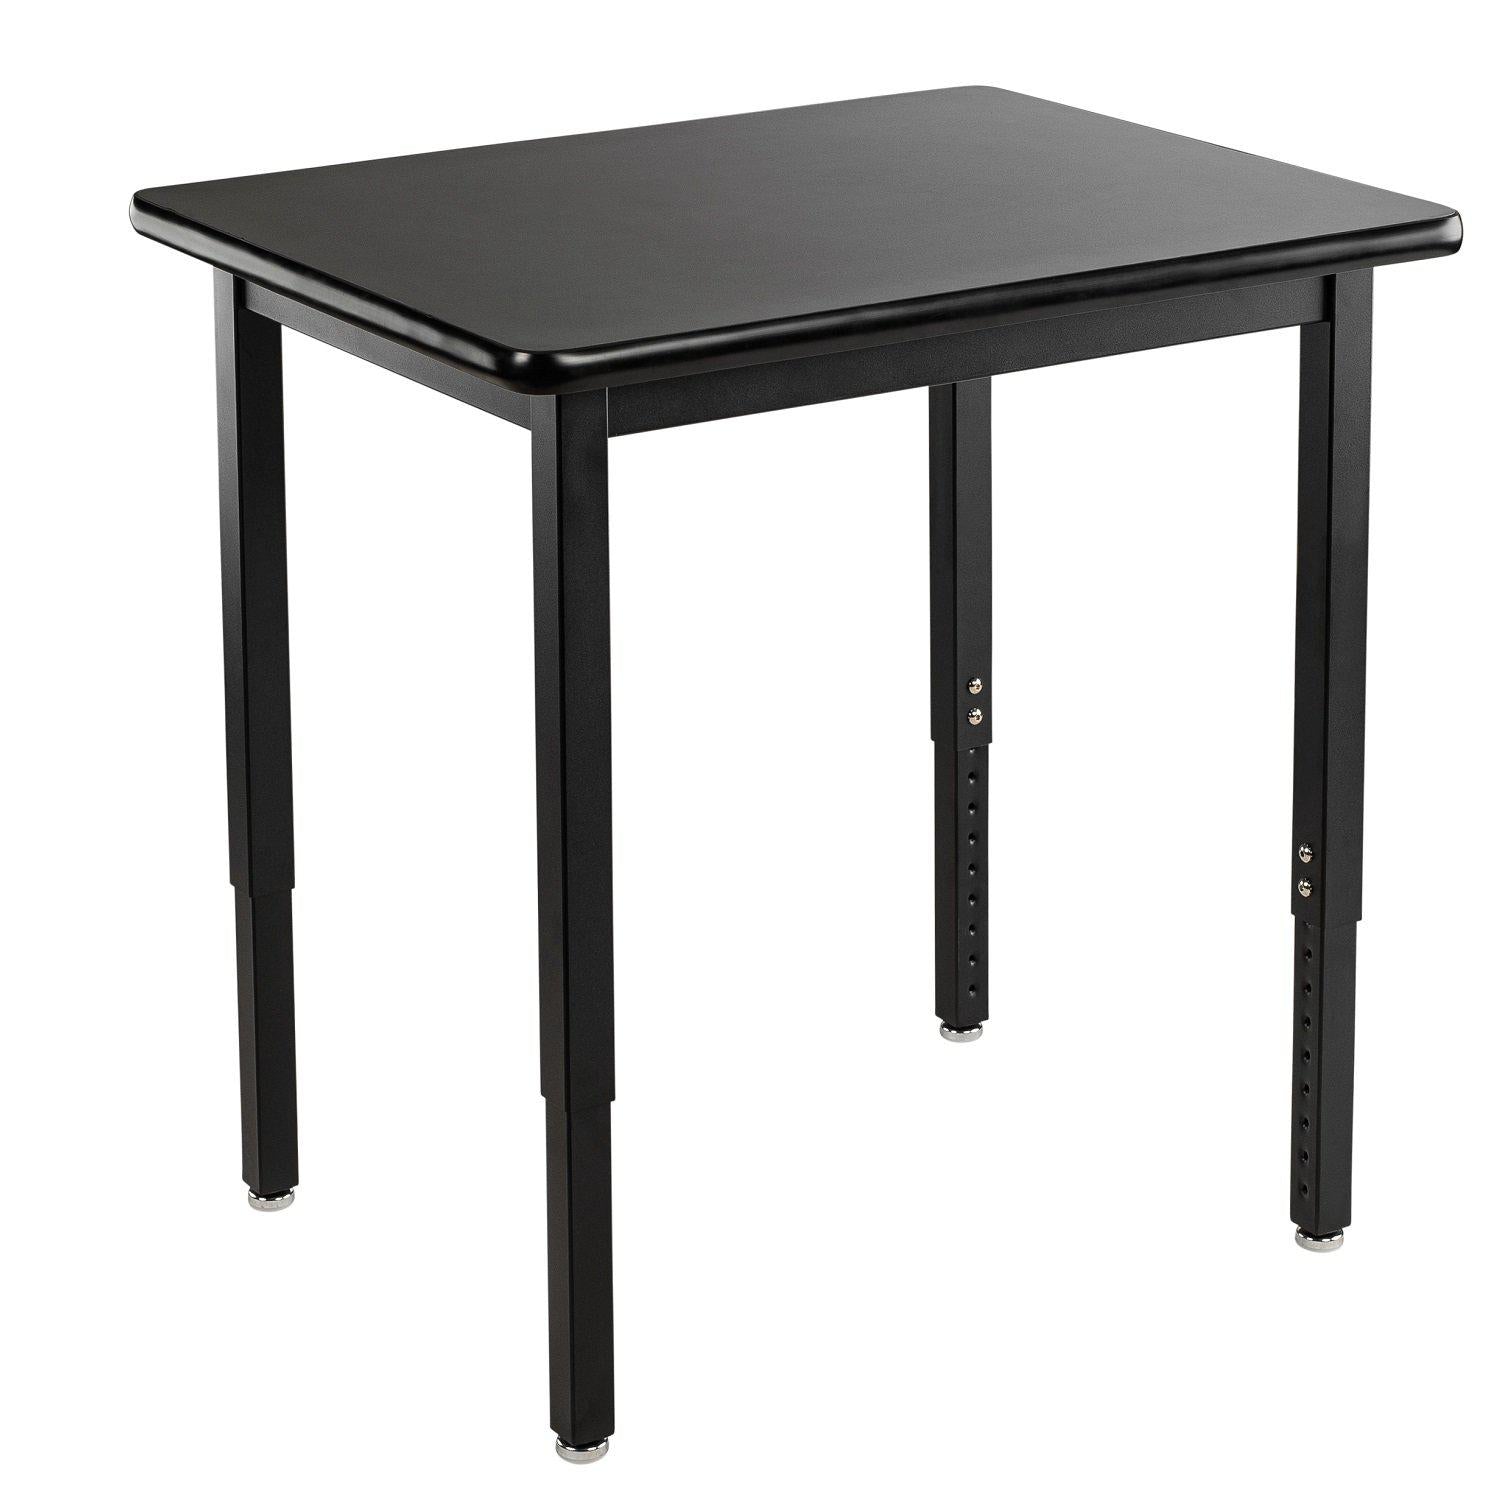 Heavy-Duty Height-Adjustable Utility Table, Black Frame, 24" x 30", High-Pressure Laminate Top with T-Mold Edge